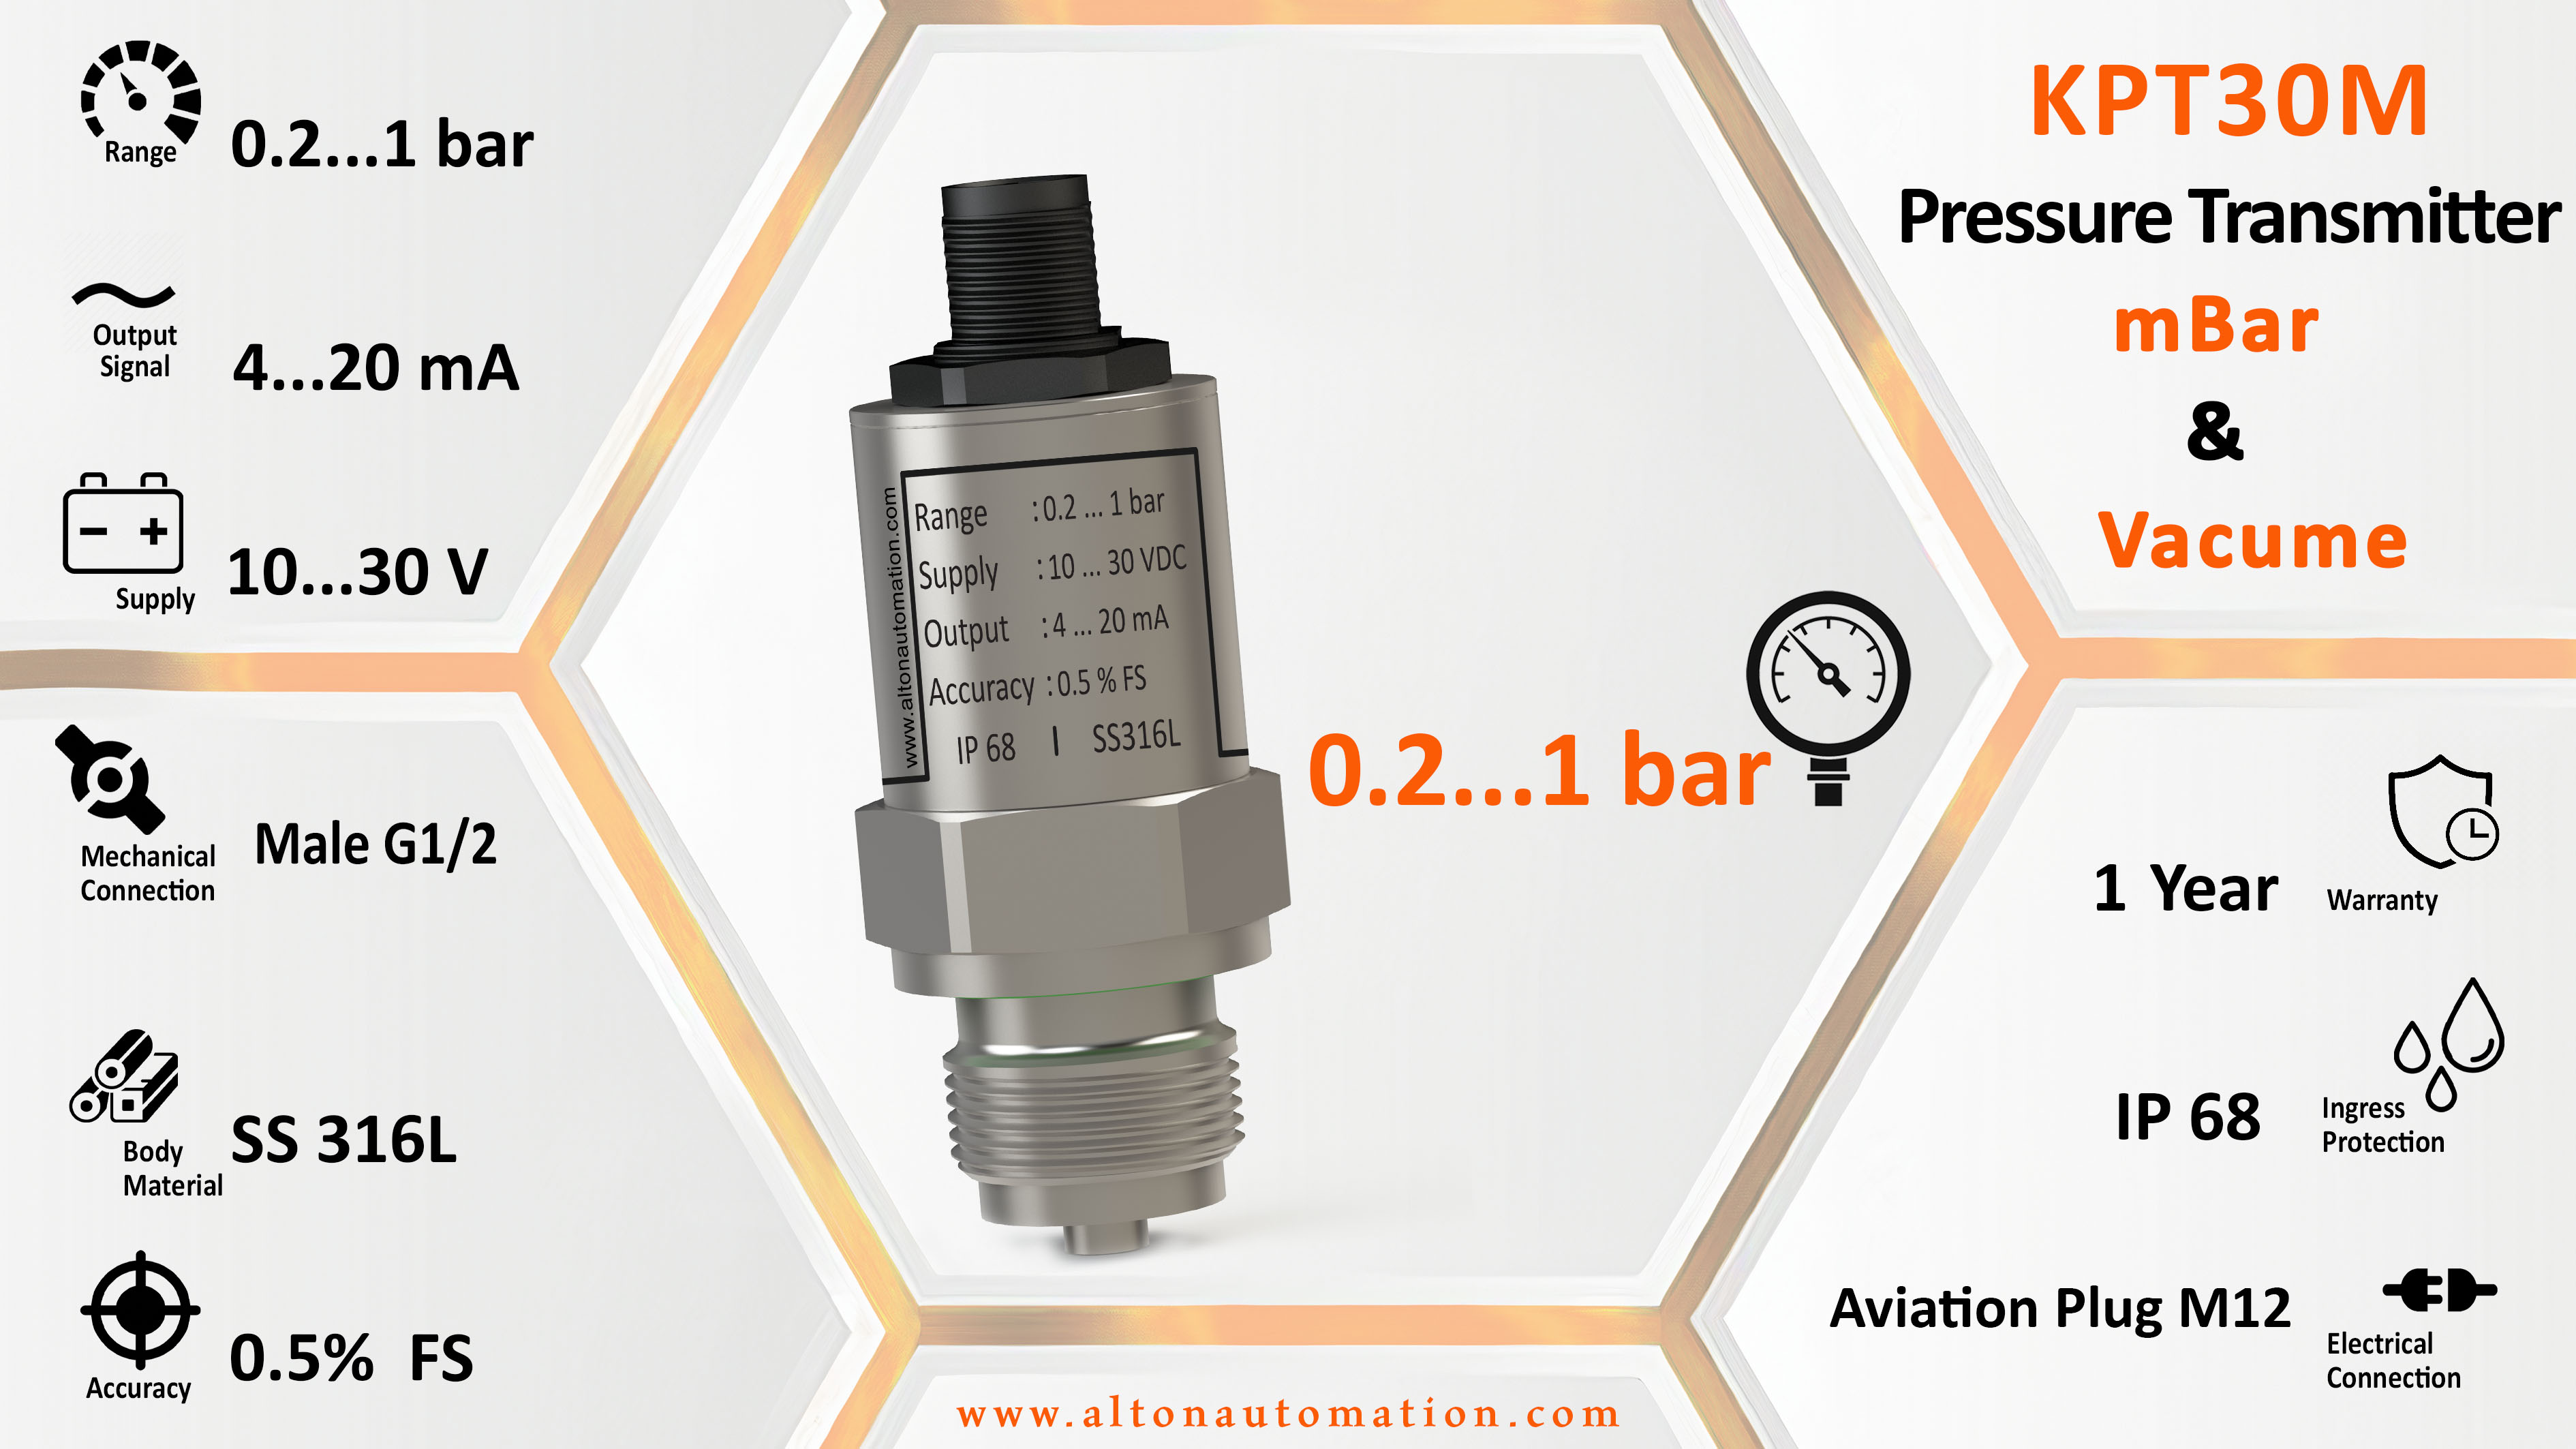 Pressure Transmitter for mbar and vacume_KPT30M-315-C1-MG2_image_2